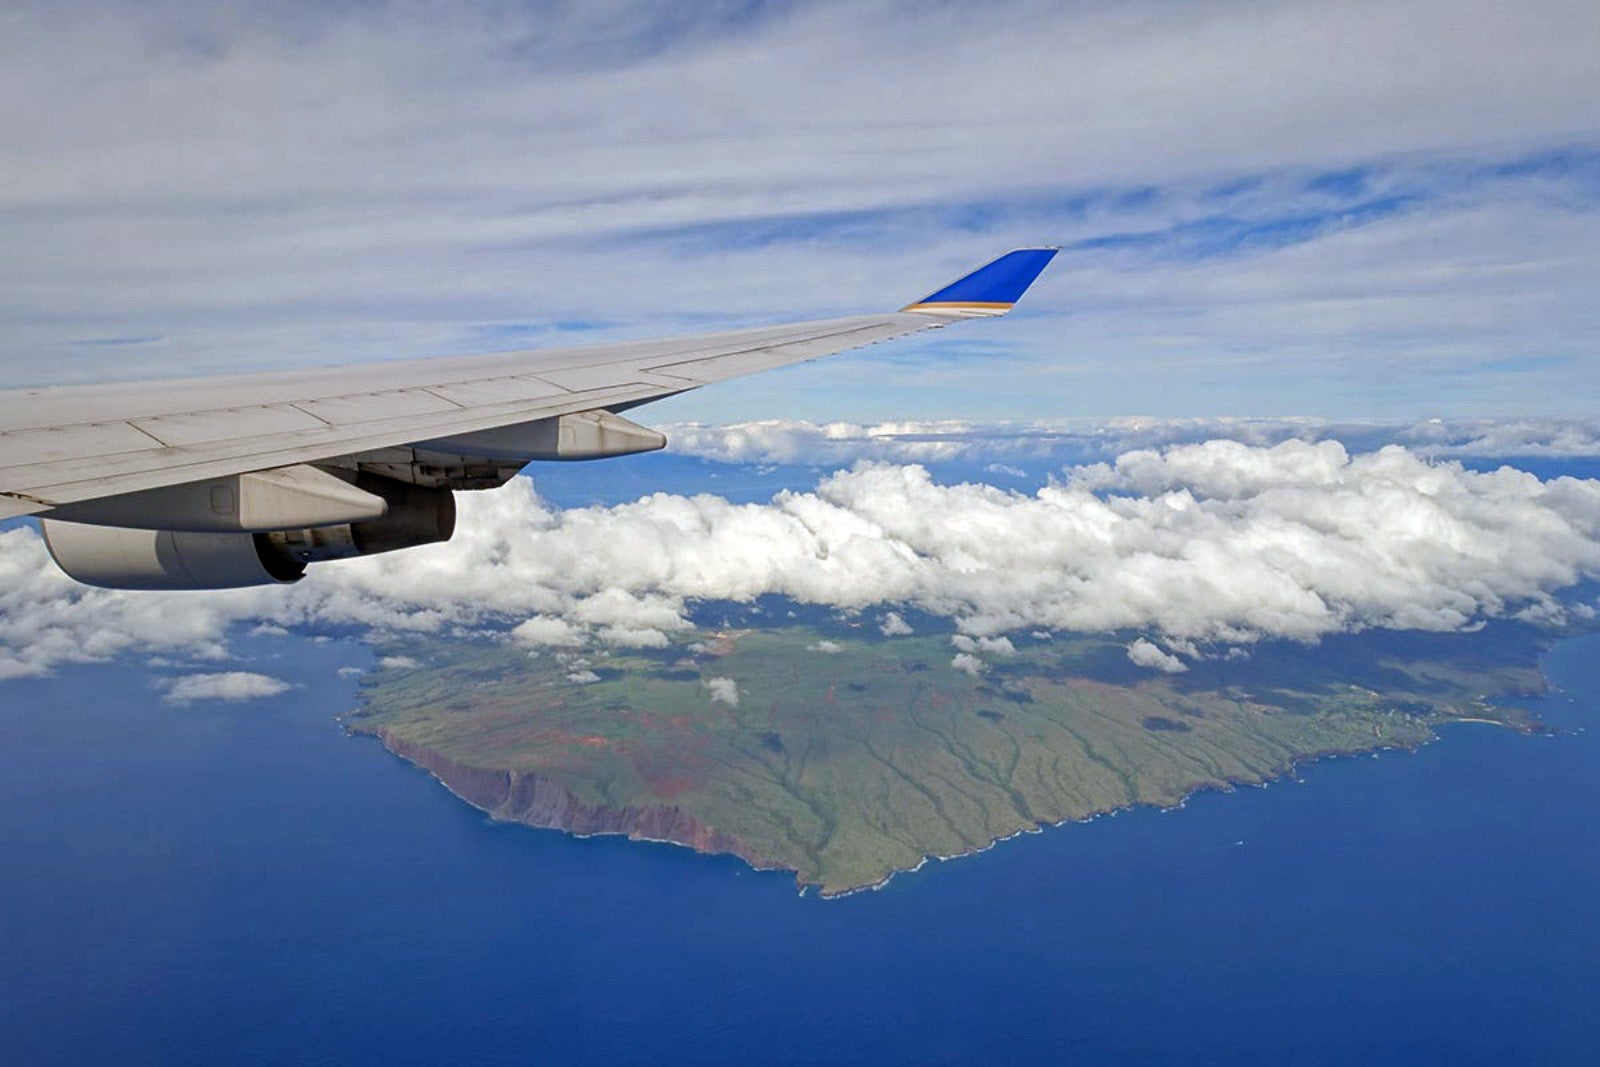 United will begin offering free economy meals on select Hawaii flights